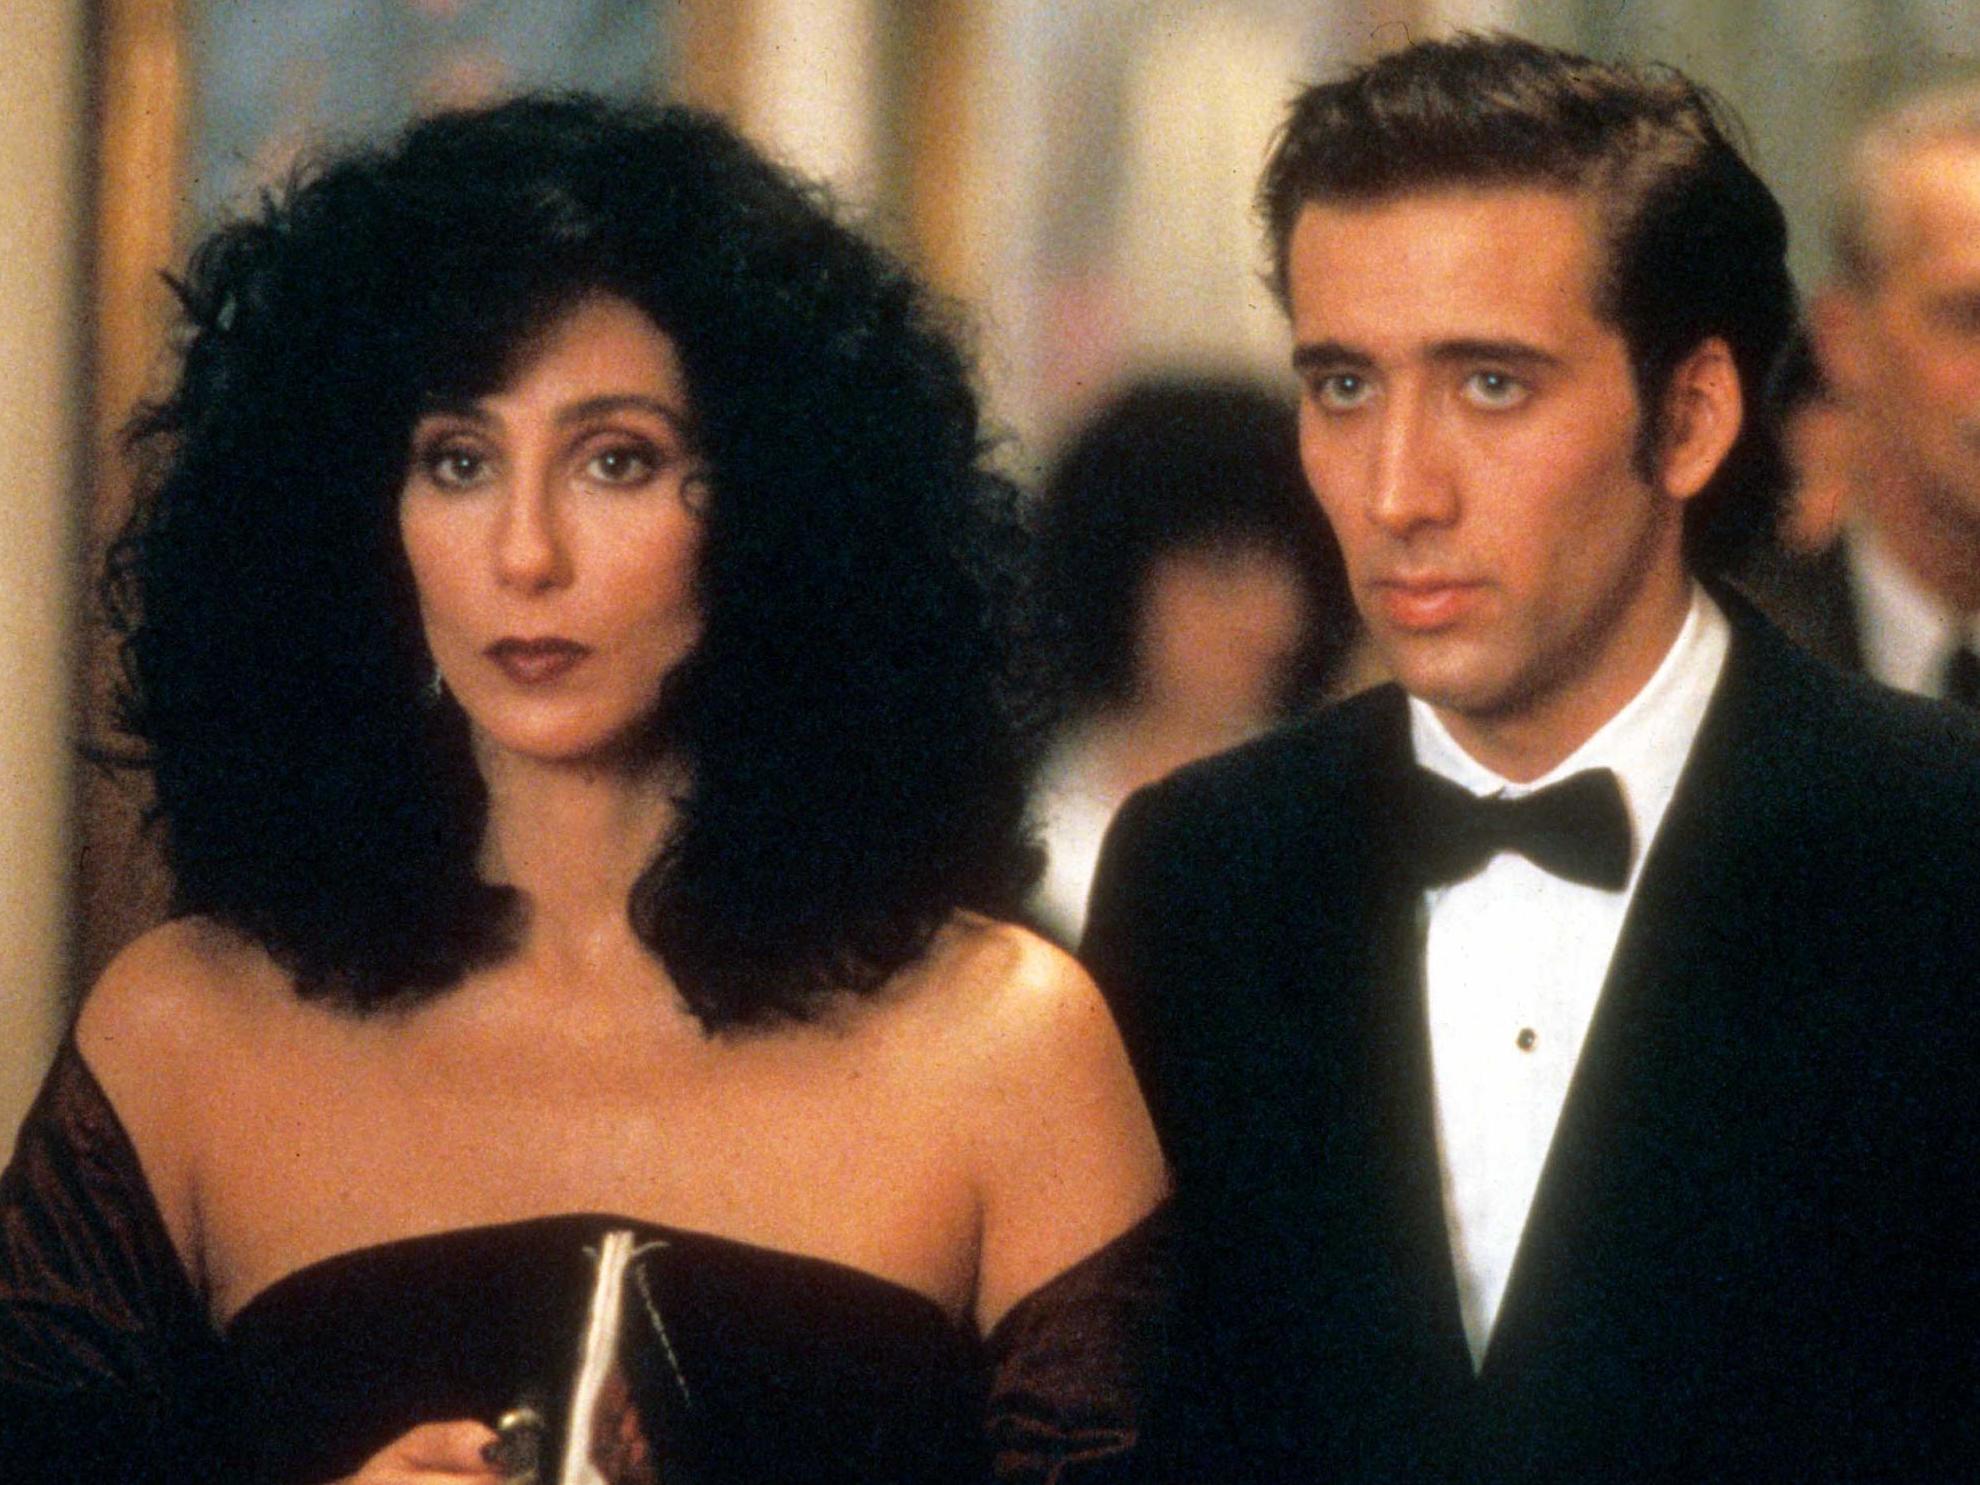 Cher and Nicolas Cage in ‘Moonstruck’ (1987)